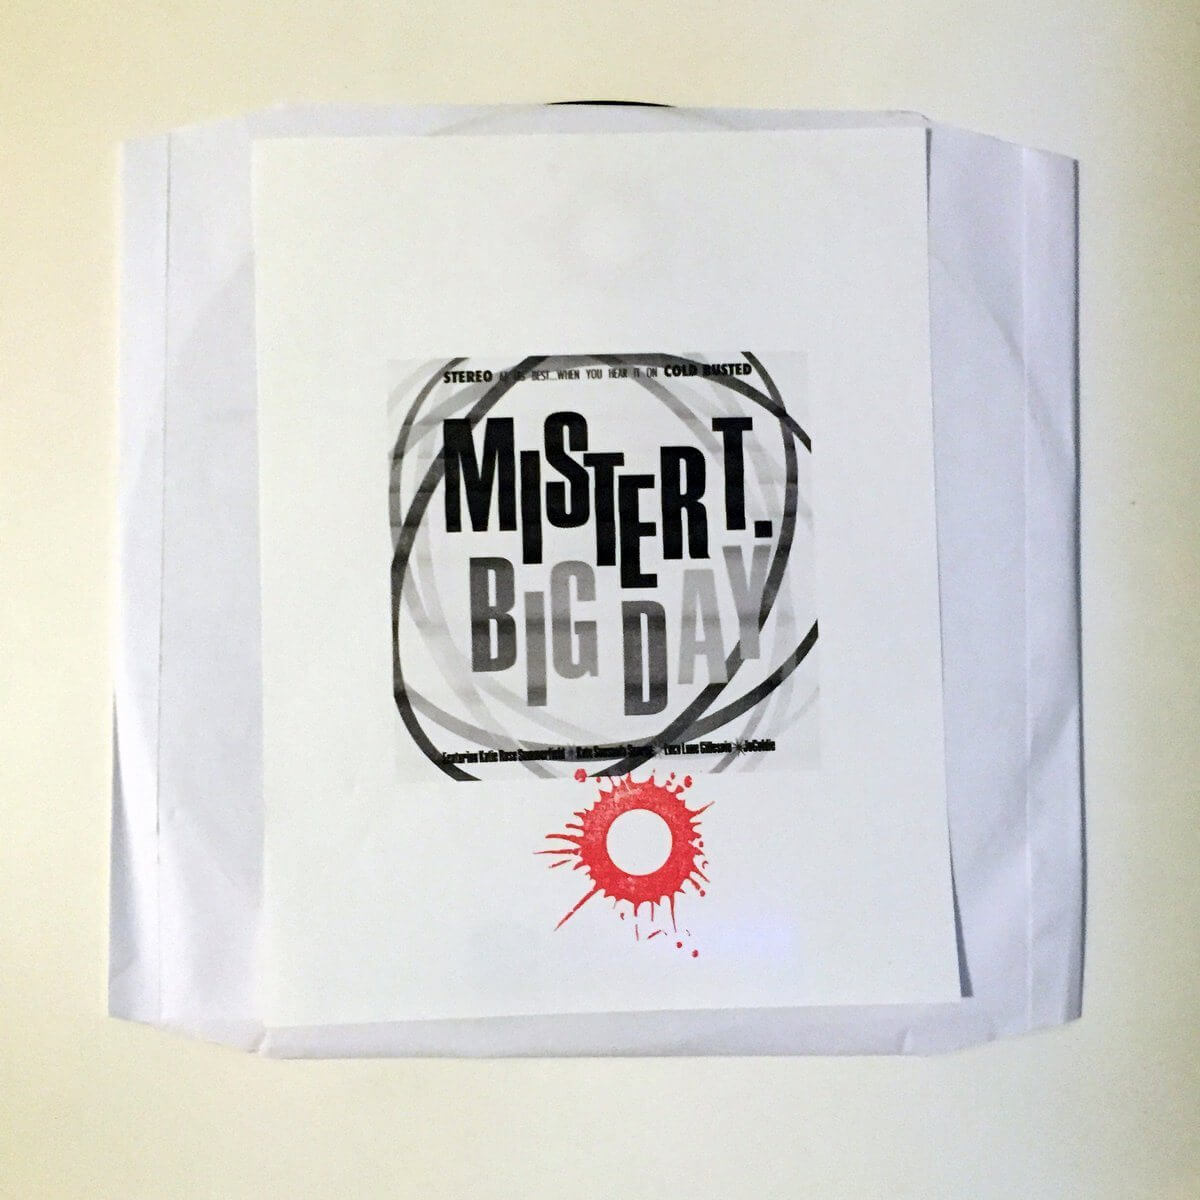 Mister T. - Big Day - Limited Edition 12 Inch Vinyl Test Pressing - Cold Busted